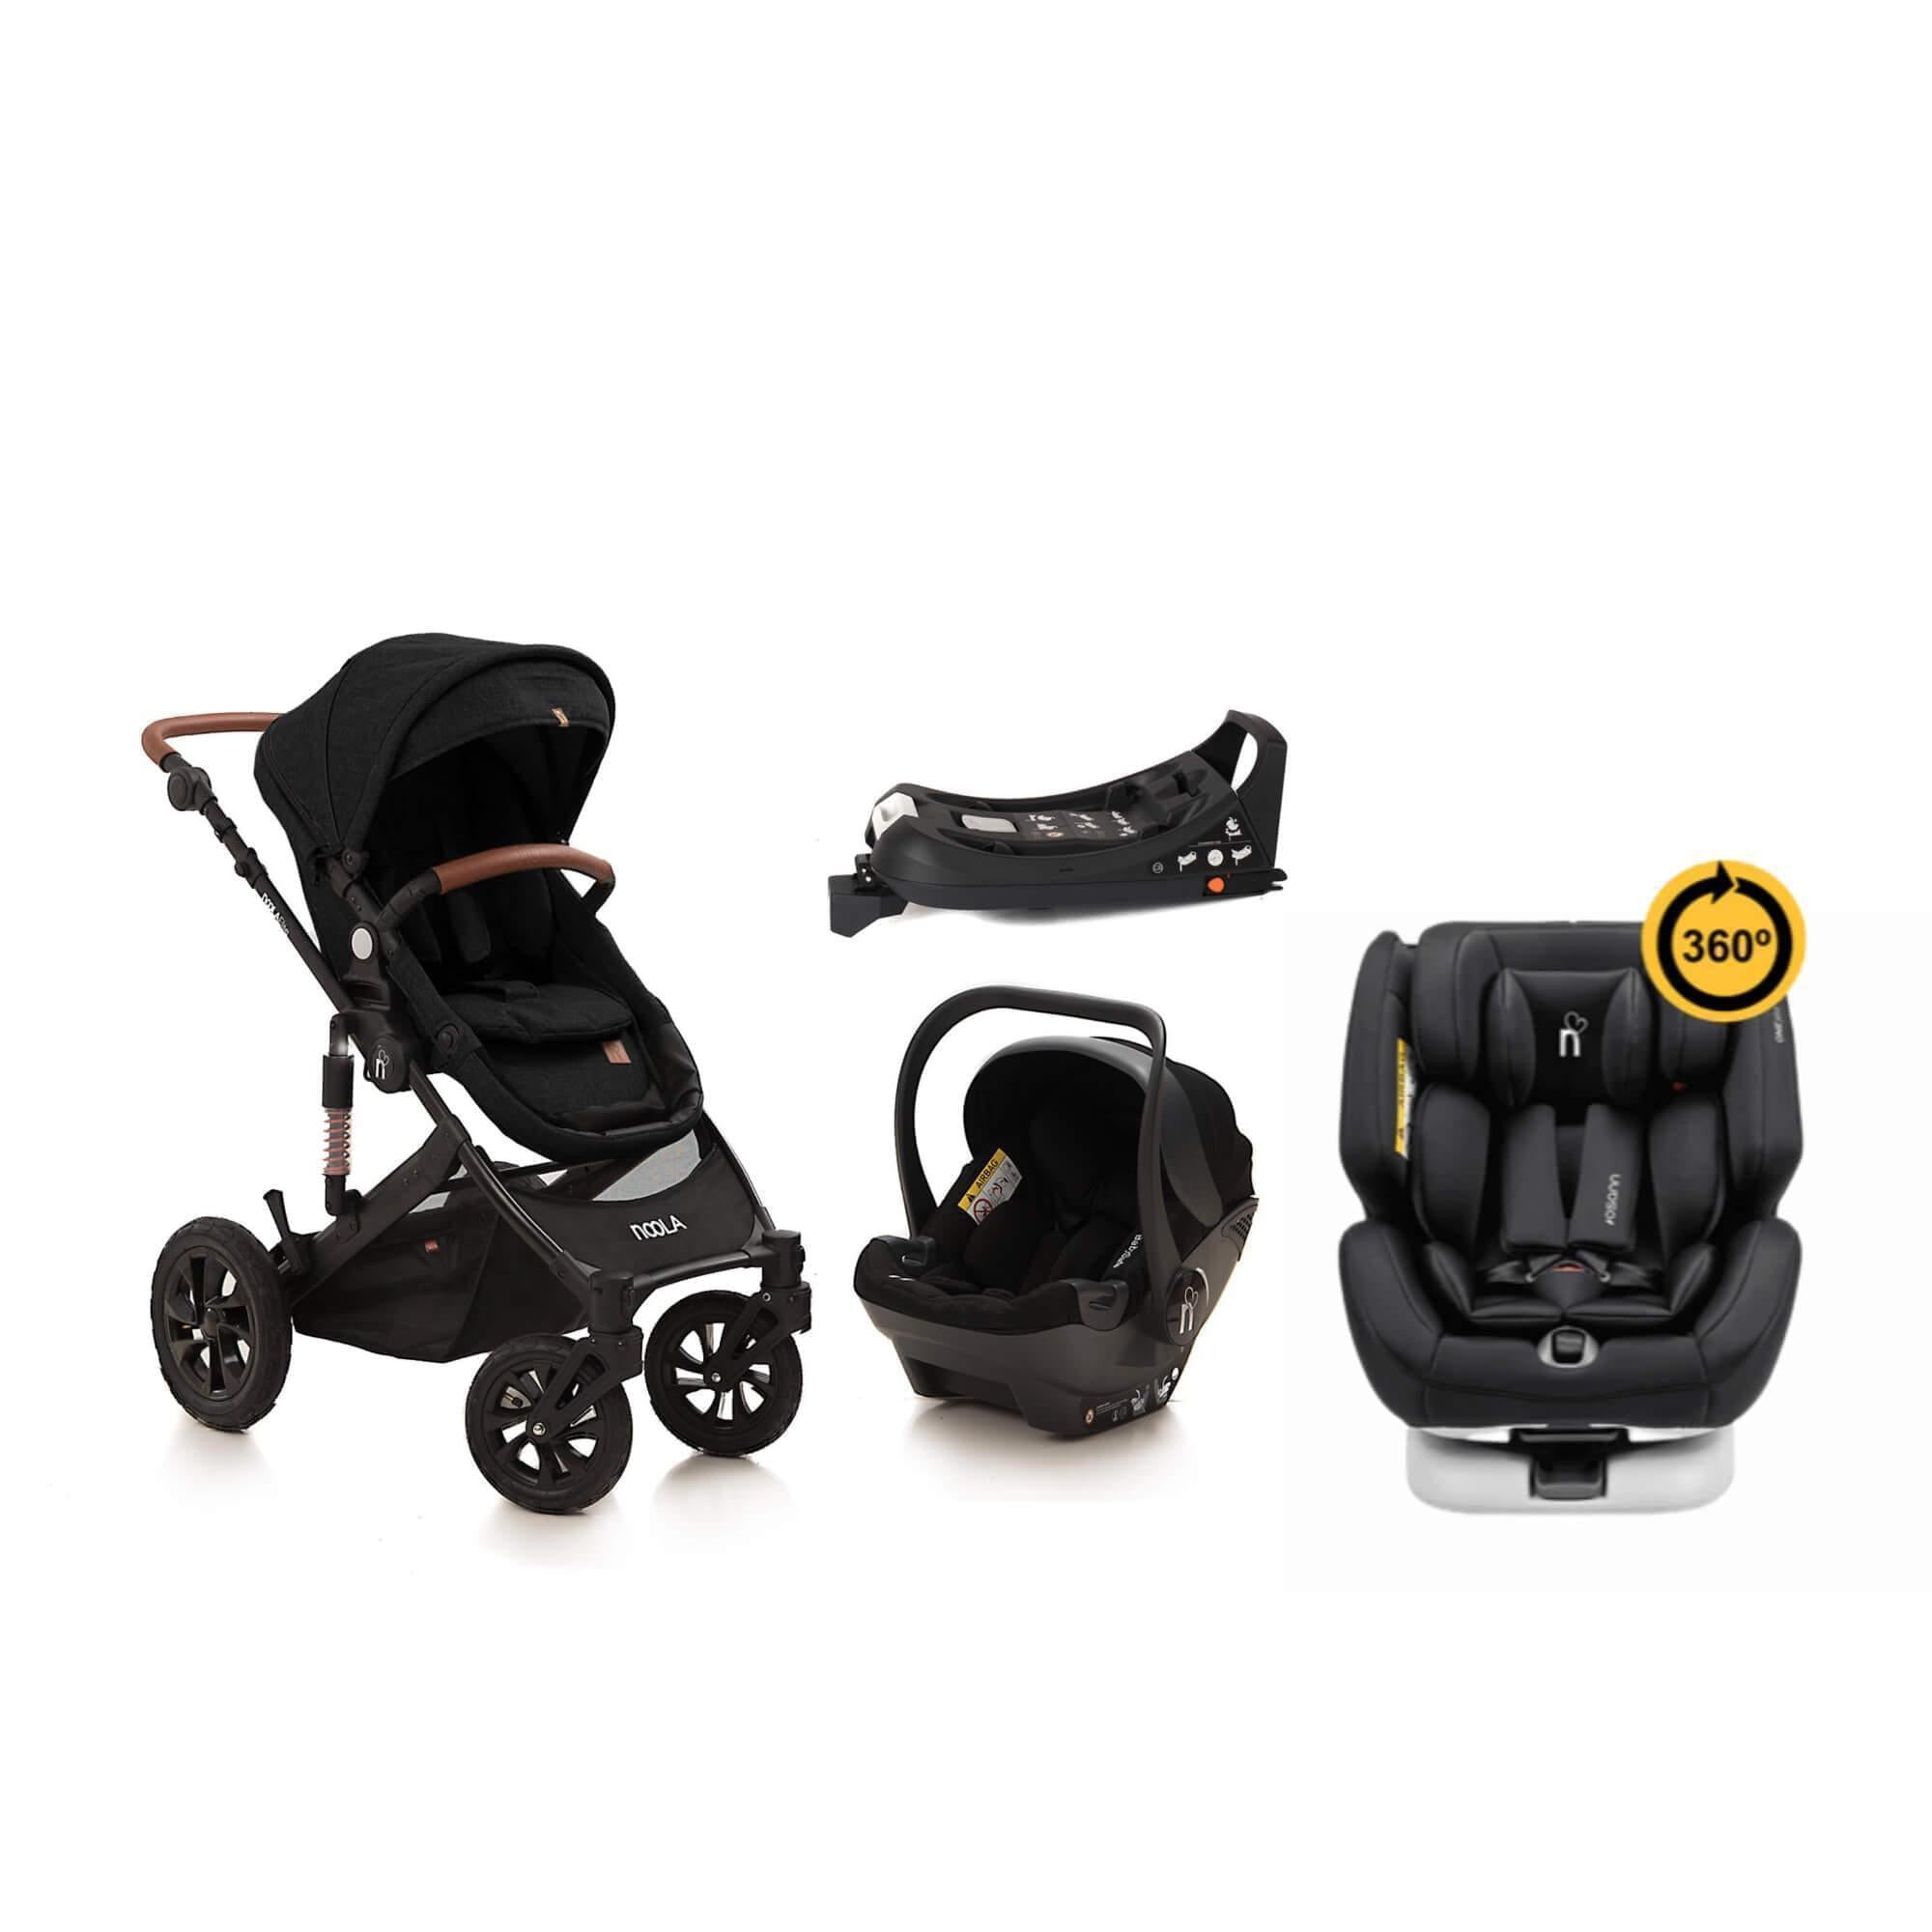 noola the elite 5in1 travel system midnight black baby stroller #SELECT THE COLOUR OF YOUR ONE360_ONE360 | MIDNIGHT BLACK